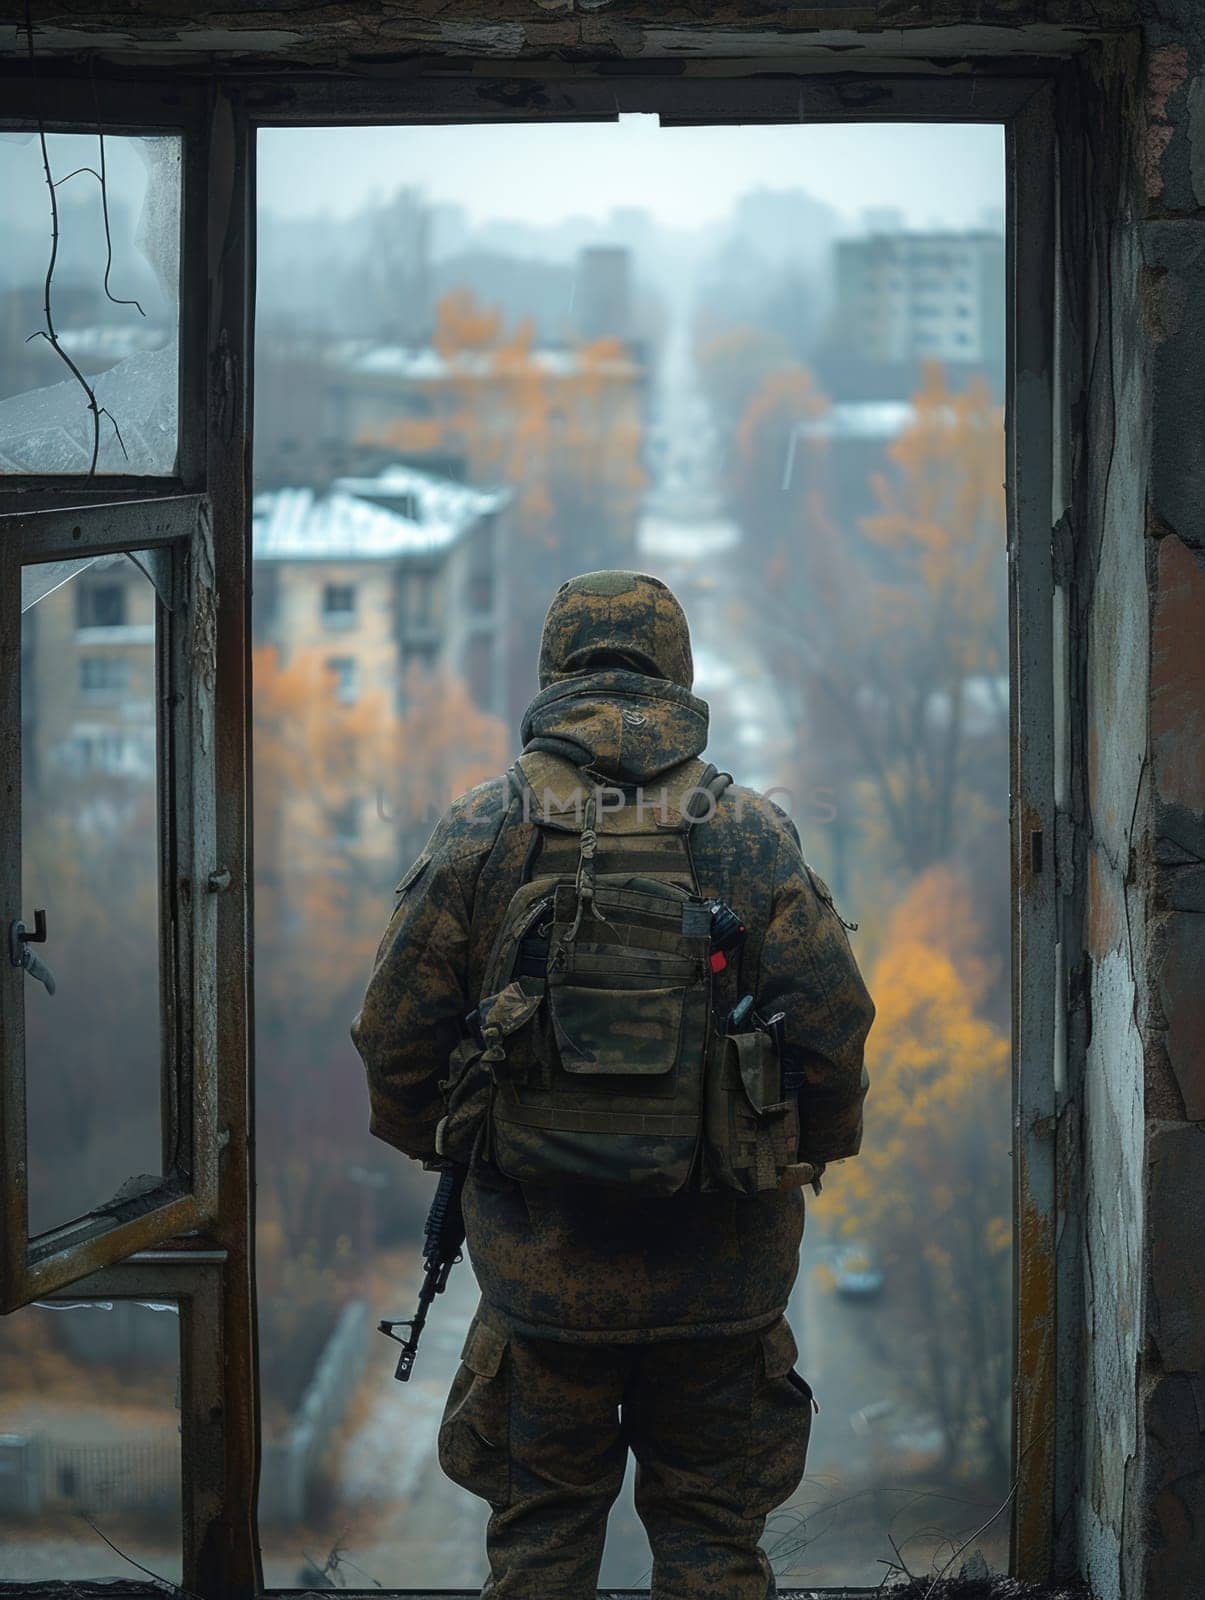 A man wearing a backpack takes a moment to gaze out of a window.